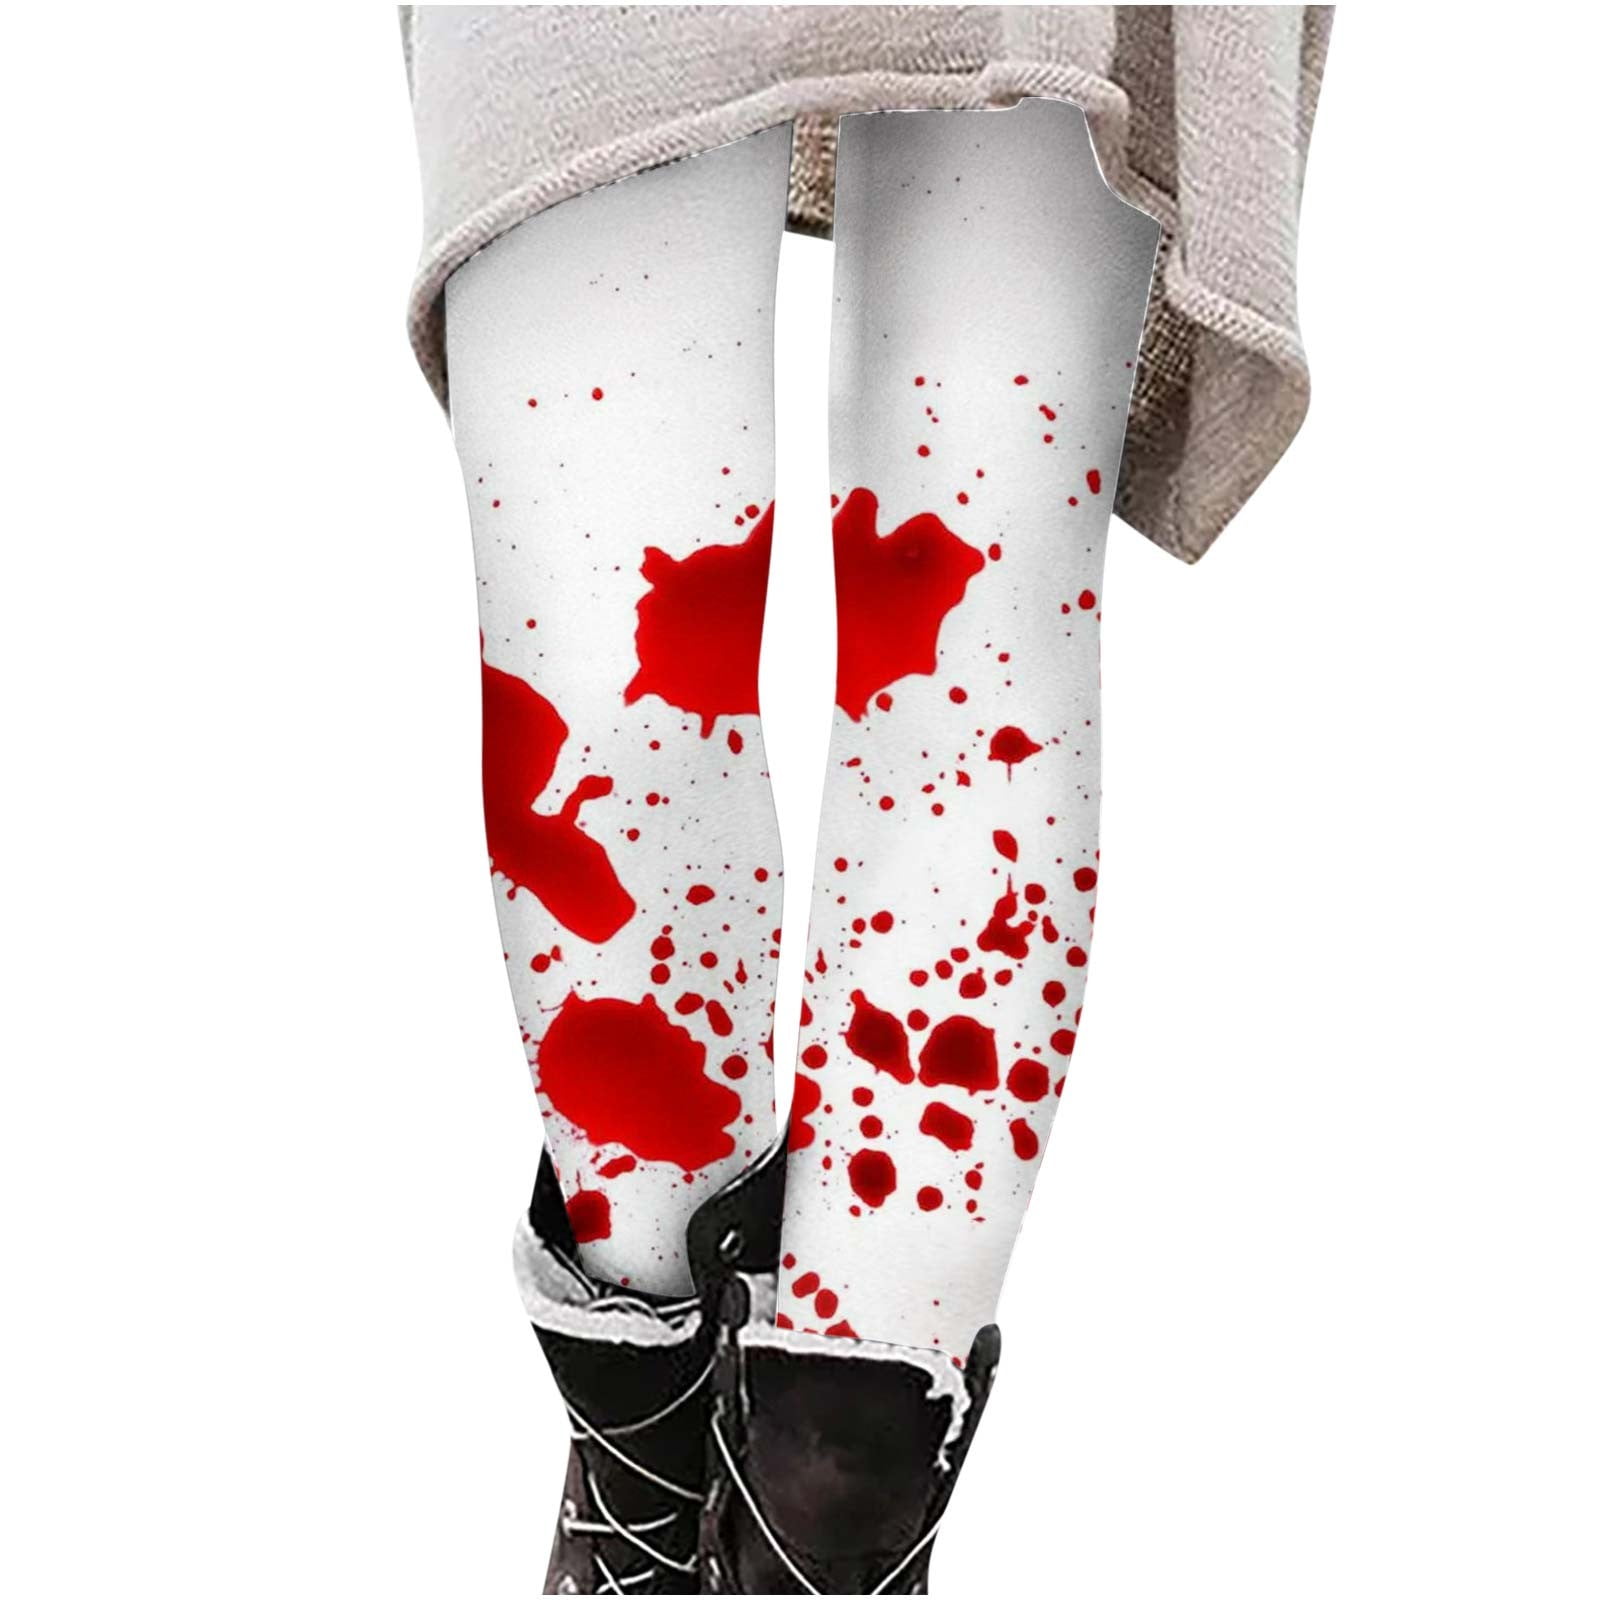 Halloween Pumpkin Crossover leggings with pockets – Cosplay